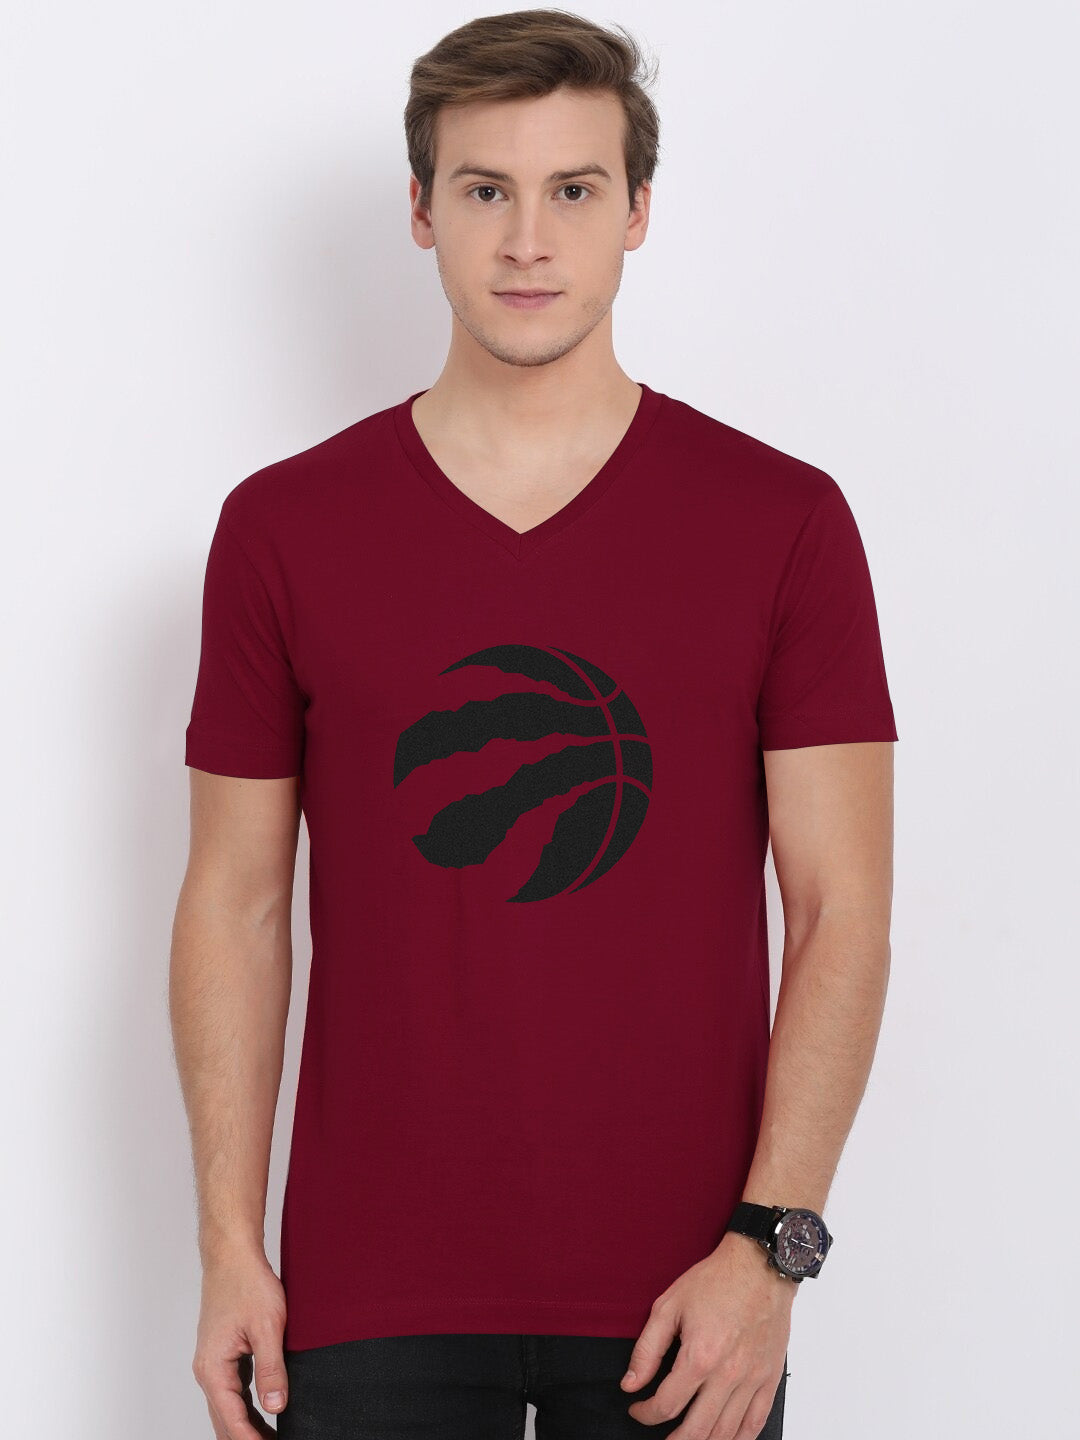 Magestic Single Jersey V Neck Tee Shirt For Men-Dark Red with Print-BE1134